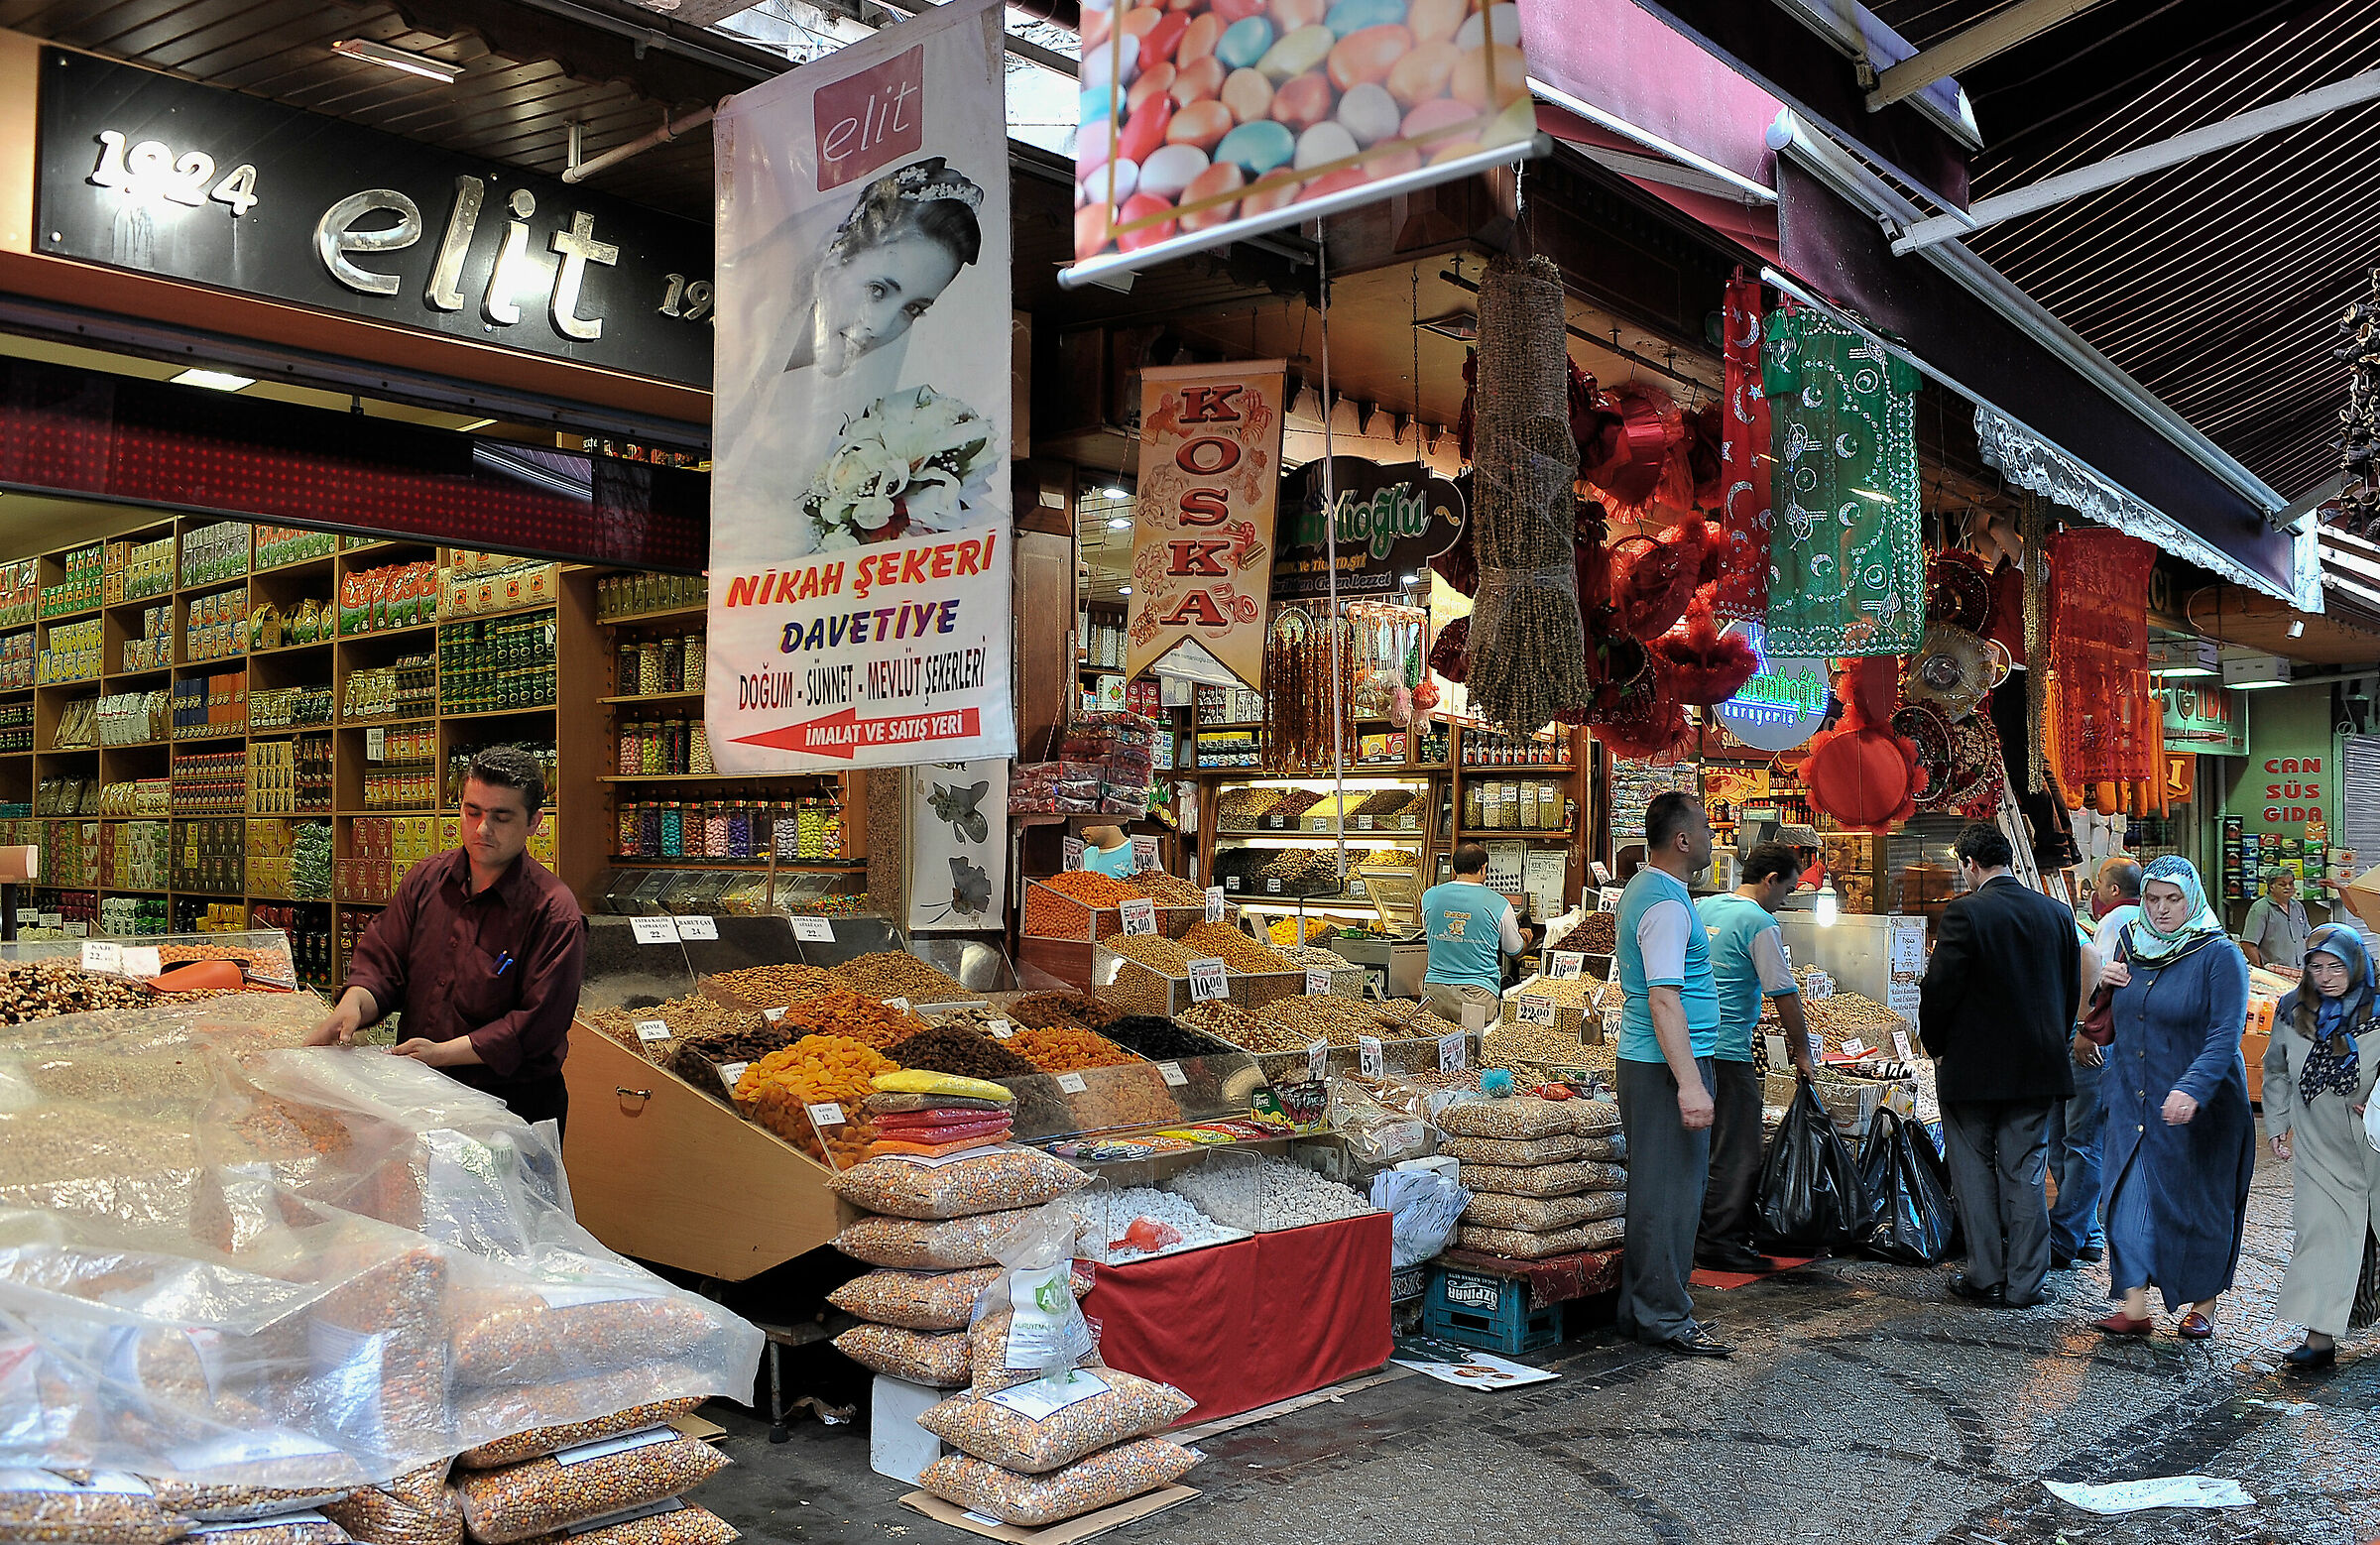 Istanbul, the spice market...